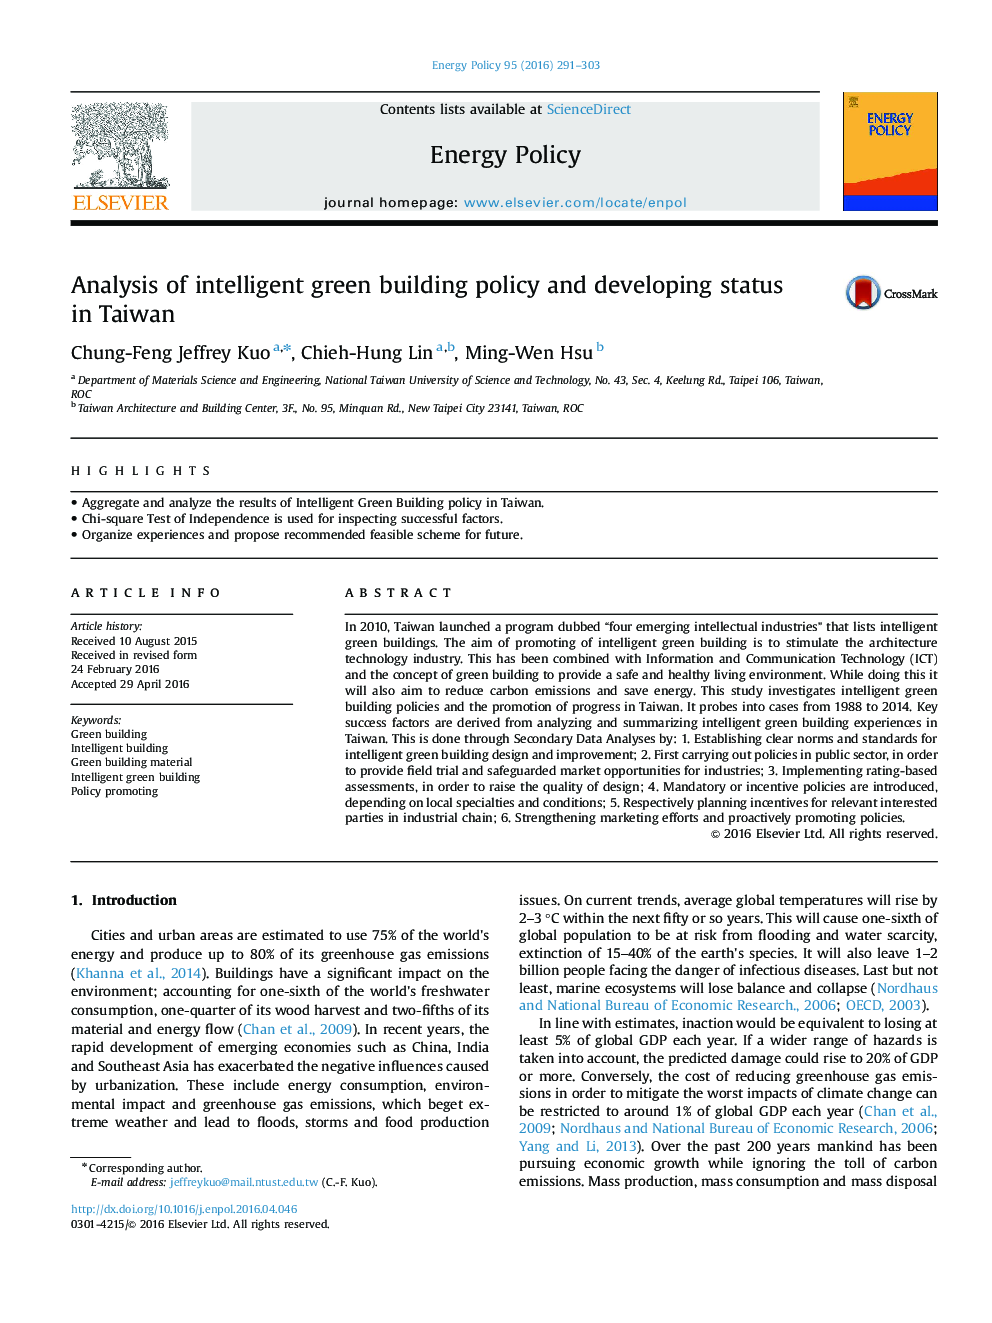 Analysis of intelligent green building policy and developing status in Taiwan